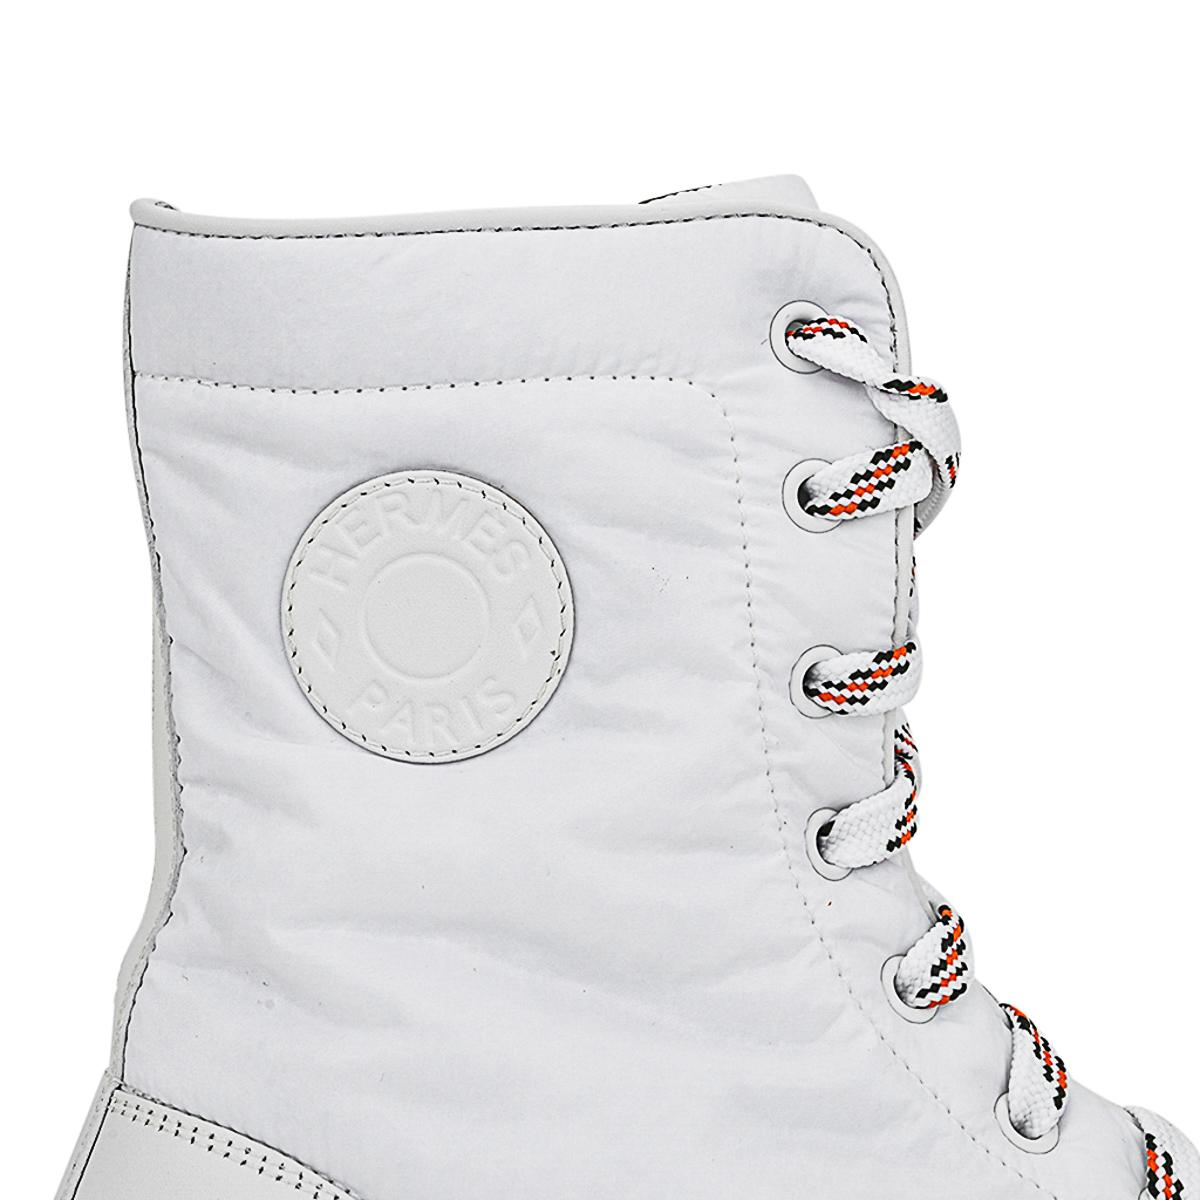 Mightychic offers a pair of Hermes Fresh Ankle Boots featured in White.
Round, White leather Clou de Selle plaque.
Water repellent parachute fabric boot with calfskin toe cap.
White laces with orange and black design.
Chic and sporty.
White rubber